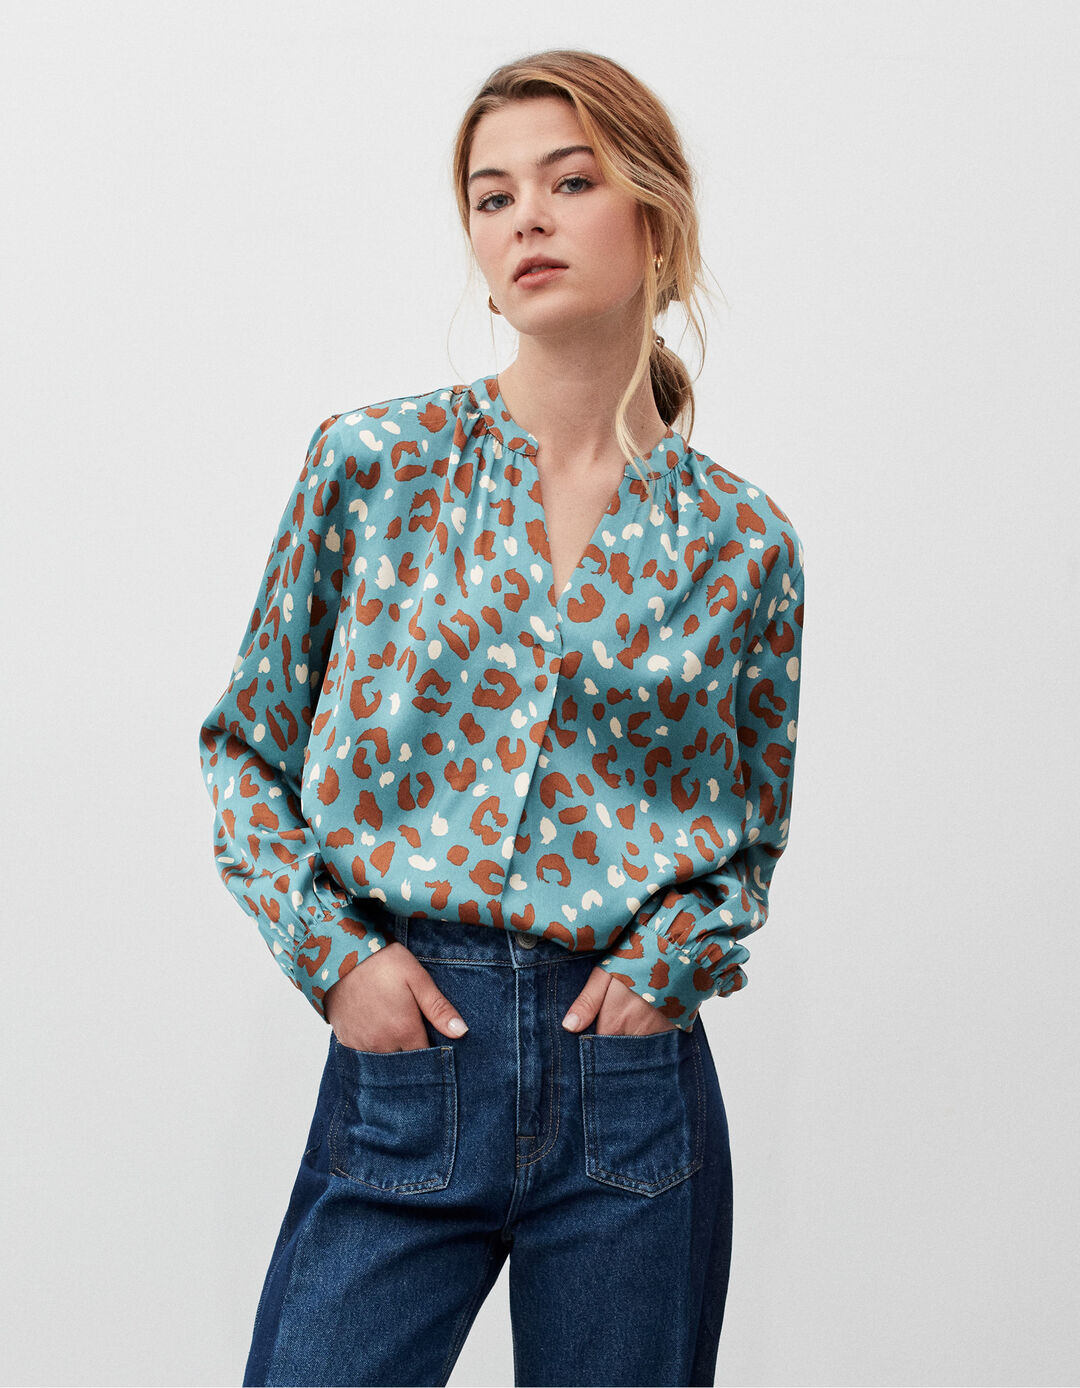 Printed Satin Blouse, Woman, Multiple colors